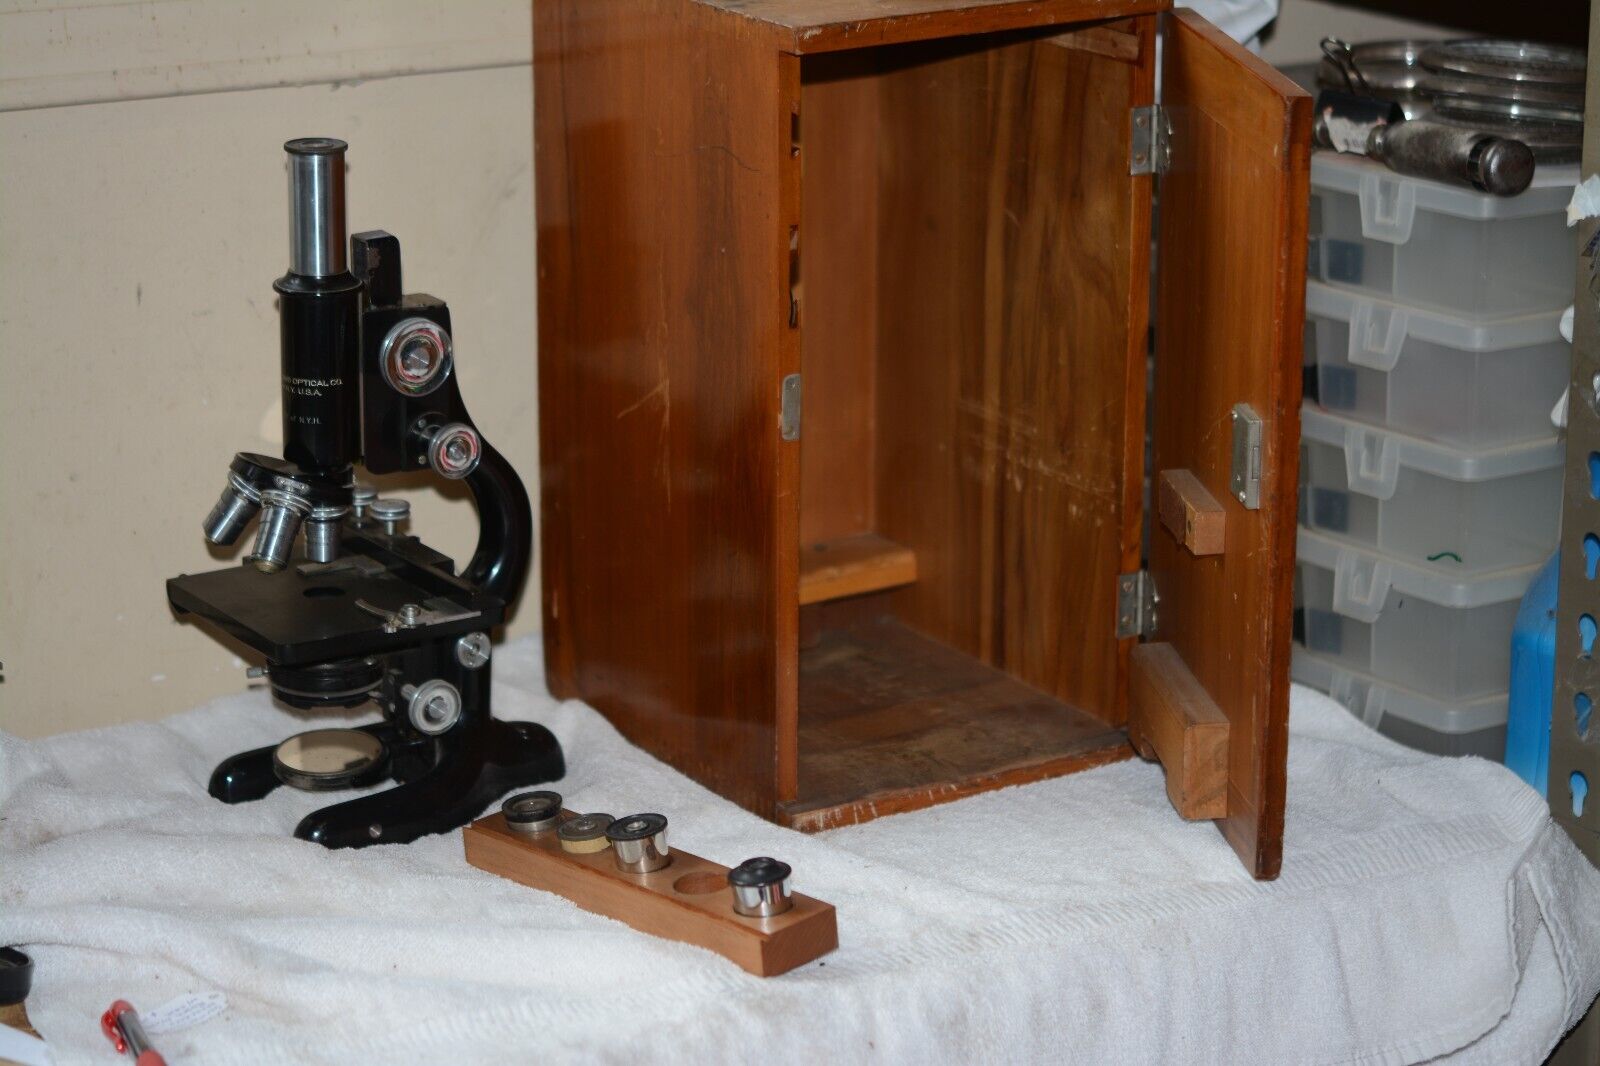 Microscopes. Vintage Bausch & Lomb Microscope W/Wooden Box and extra Lenses.